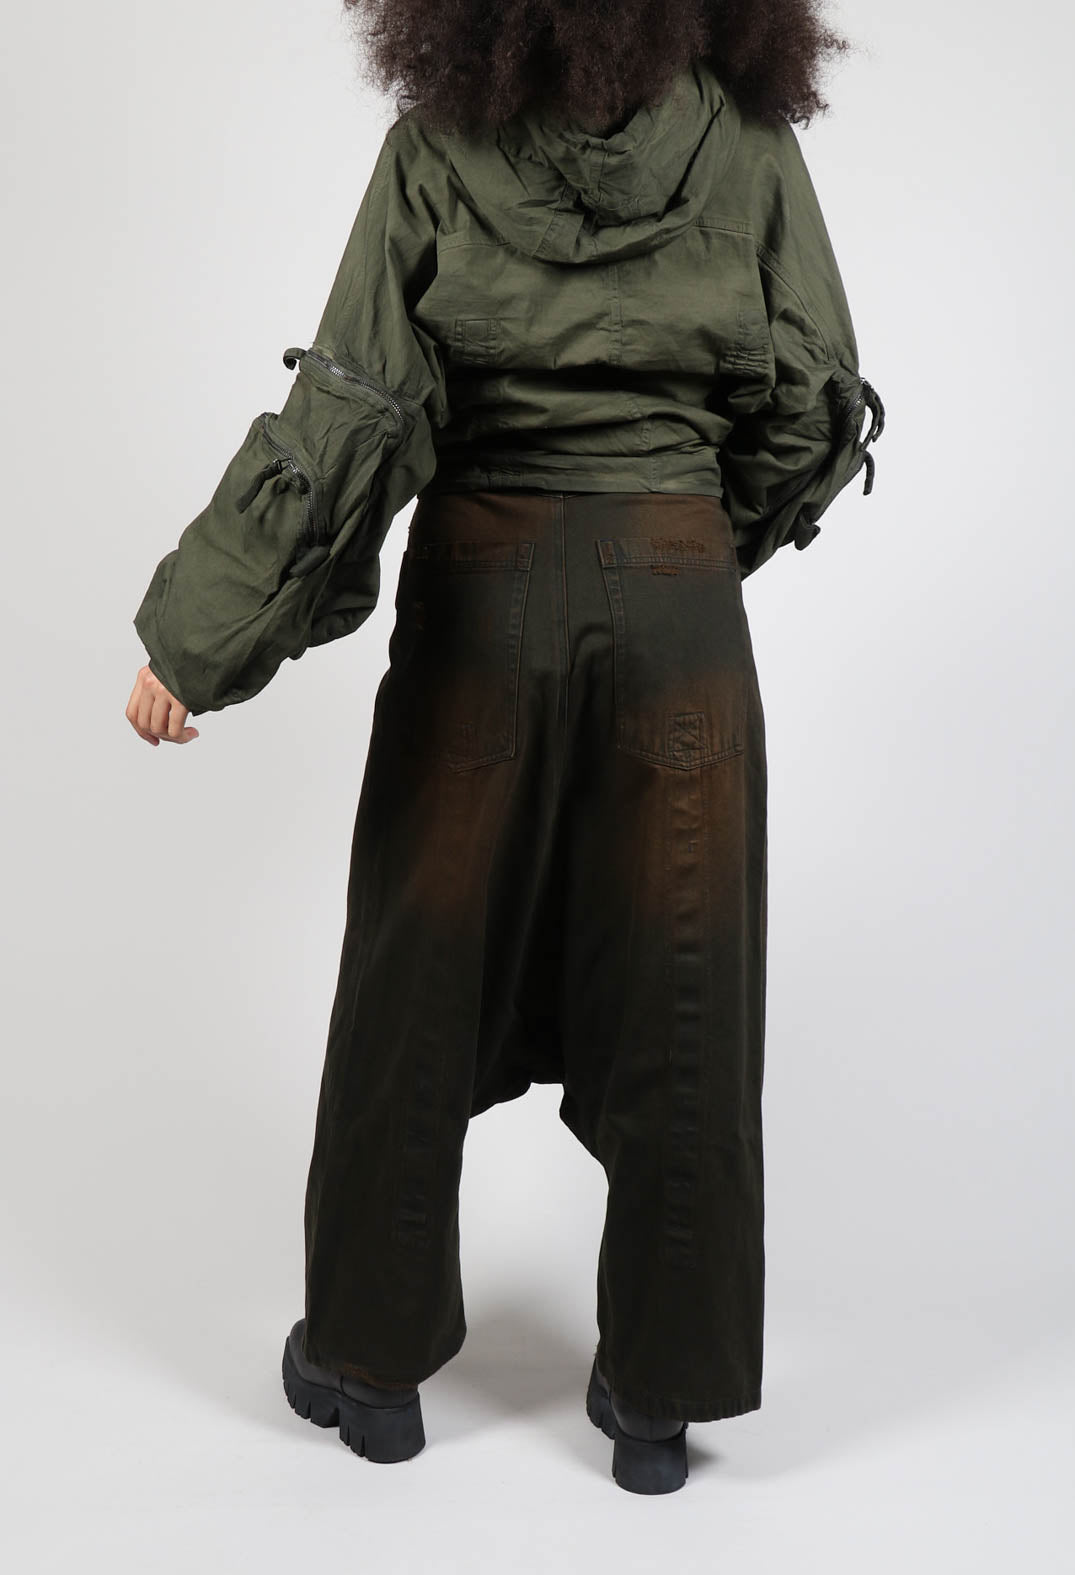 Distressed Drop Crotch Trousers in Khaki